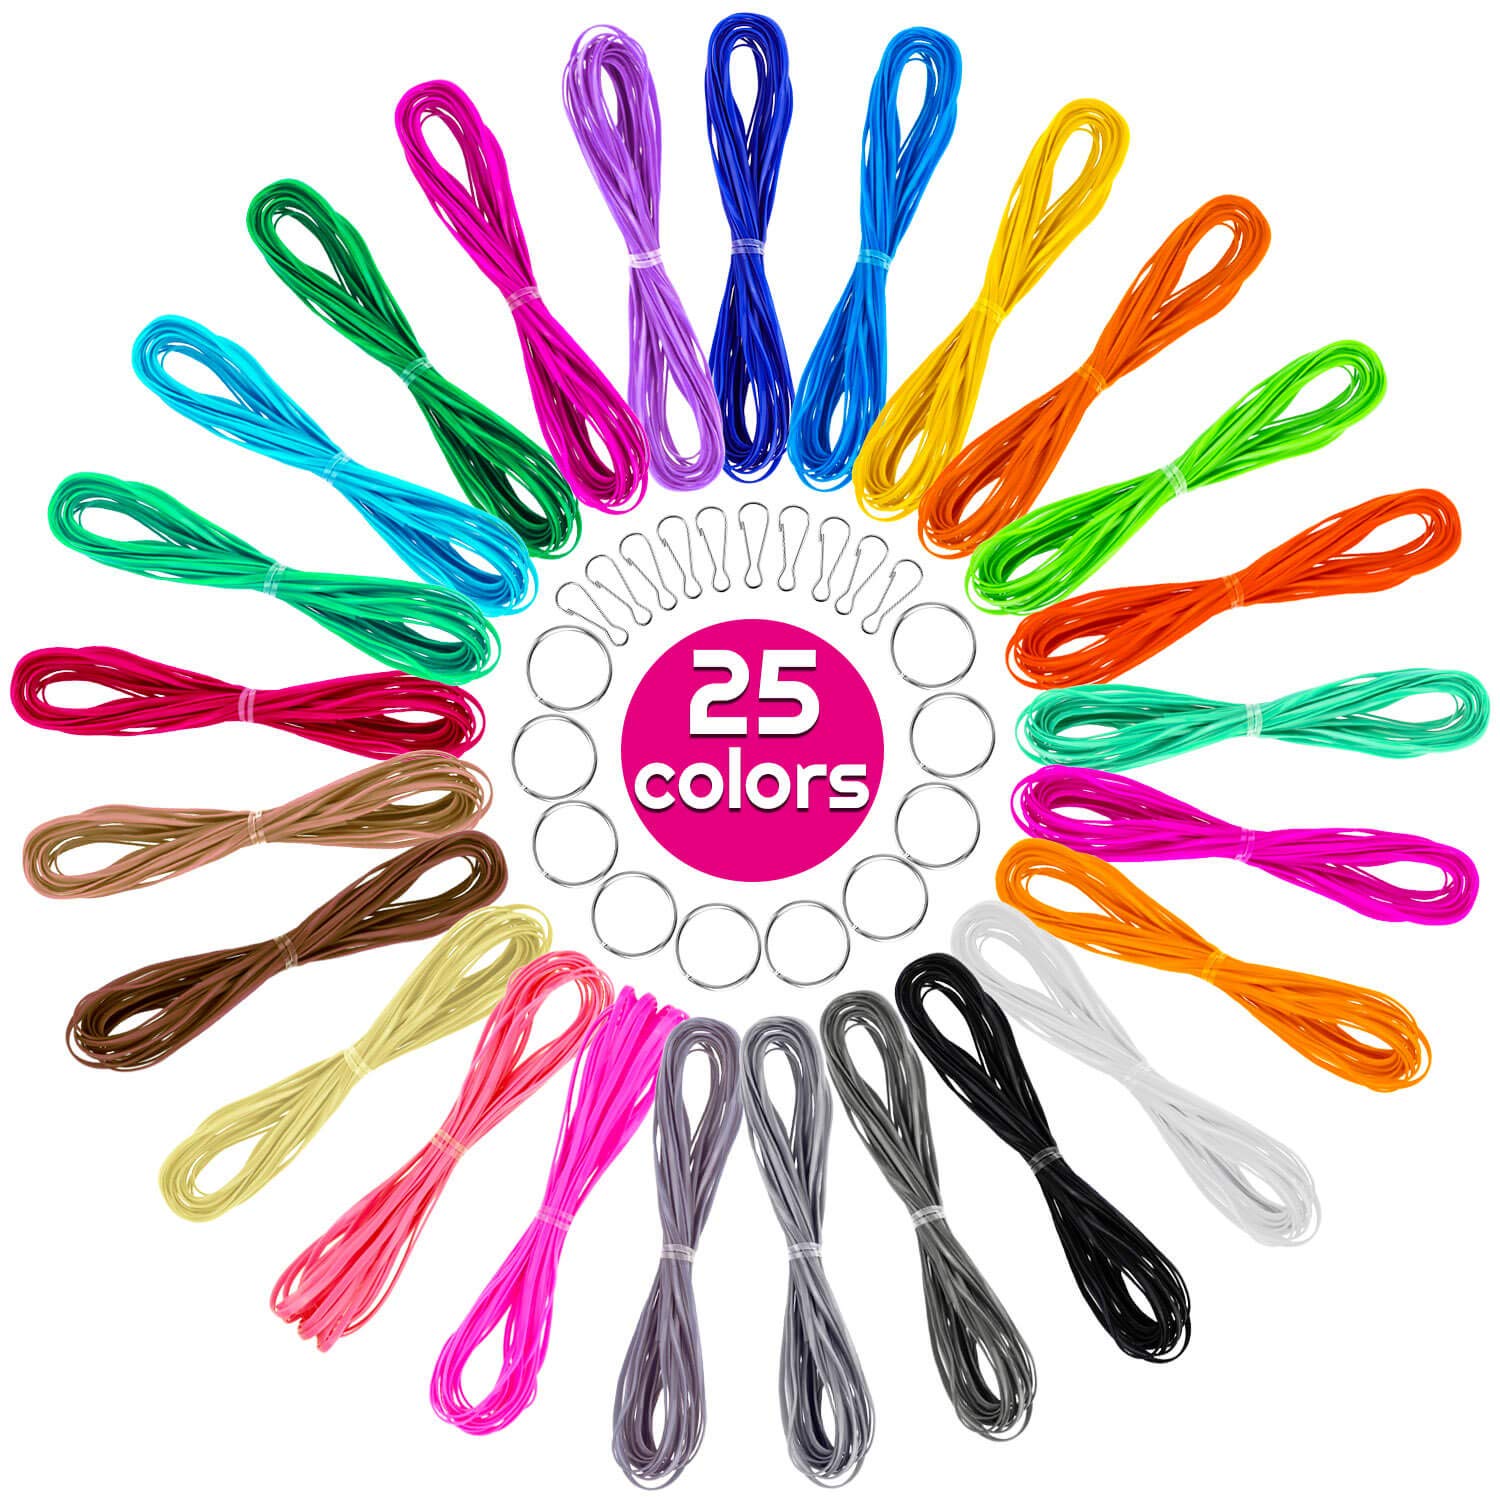 Lanyard String Cridoz 25 Colors Gimp String Plastic Lacing Cord with 20pcs  Snap Clip Hooks and